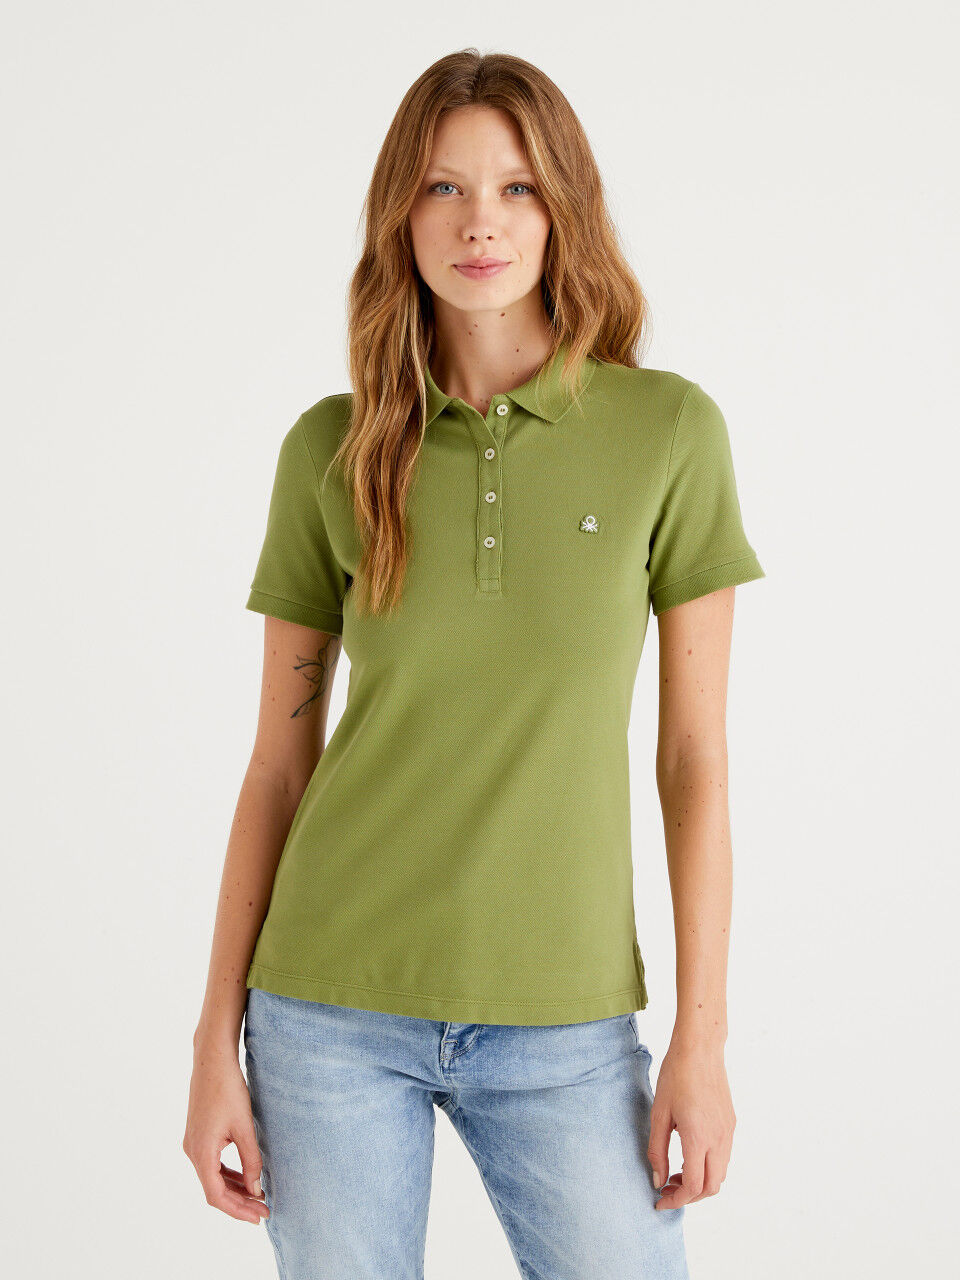 UNITED COLORS OF BENETTON H/S Polo Shirt Fille 